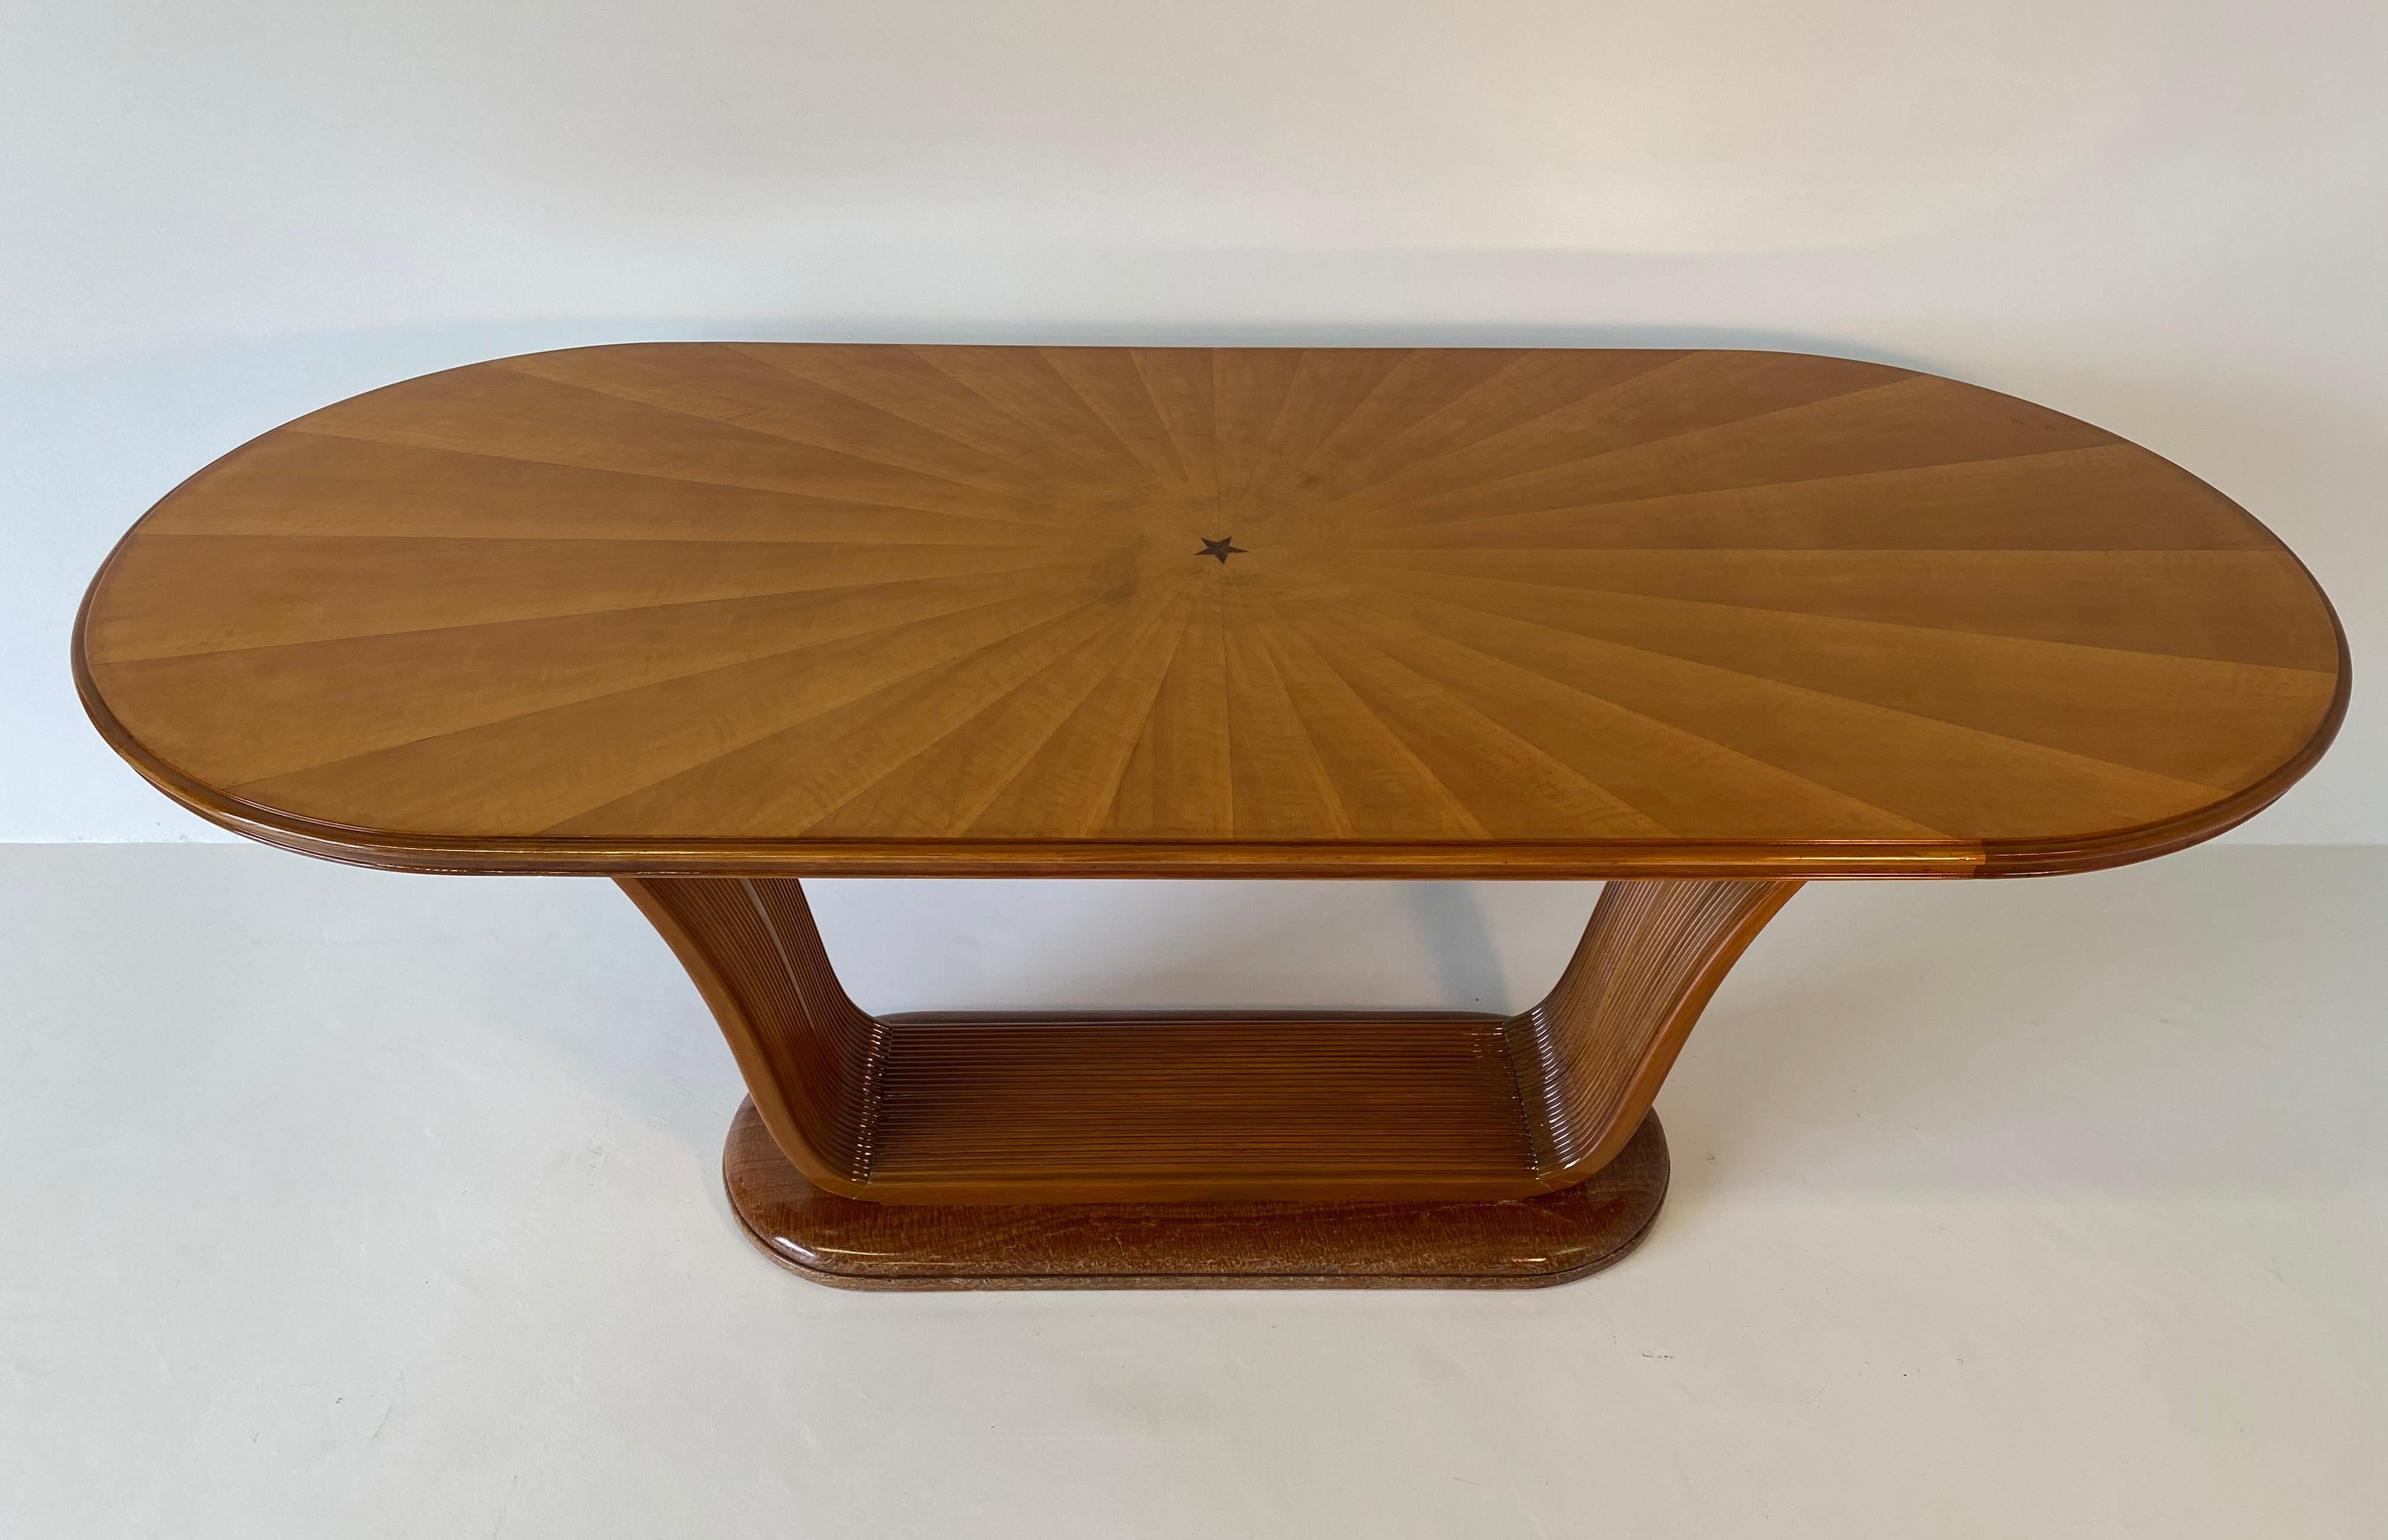 This table was produced in the 1940s in Italy.
The sinuous shape of the base is in worked blond walnut while the top is inlaid with a star in the center.
The base is in precious red marble.
Completely restored.